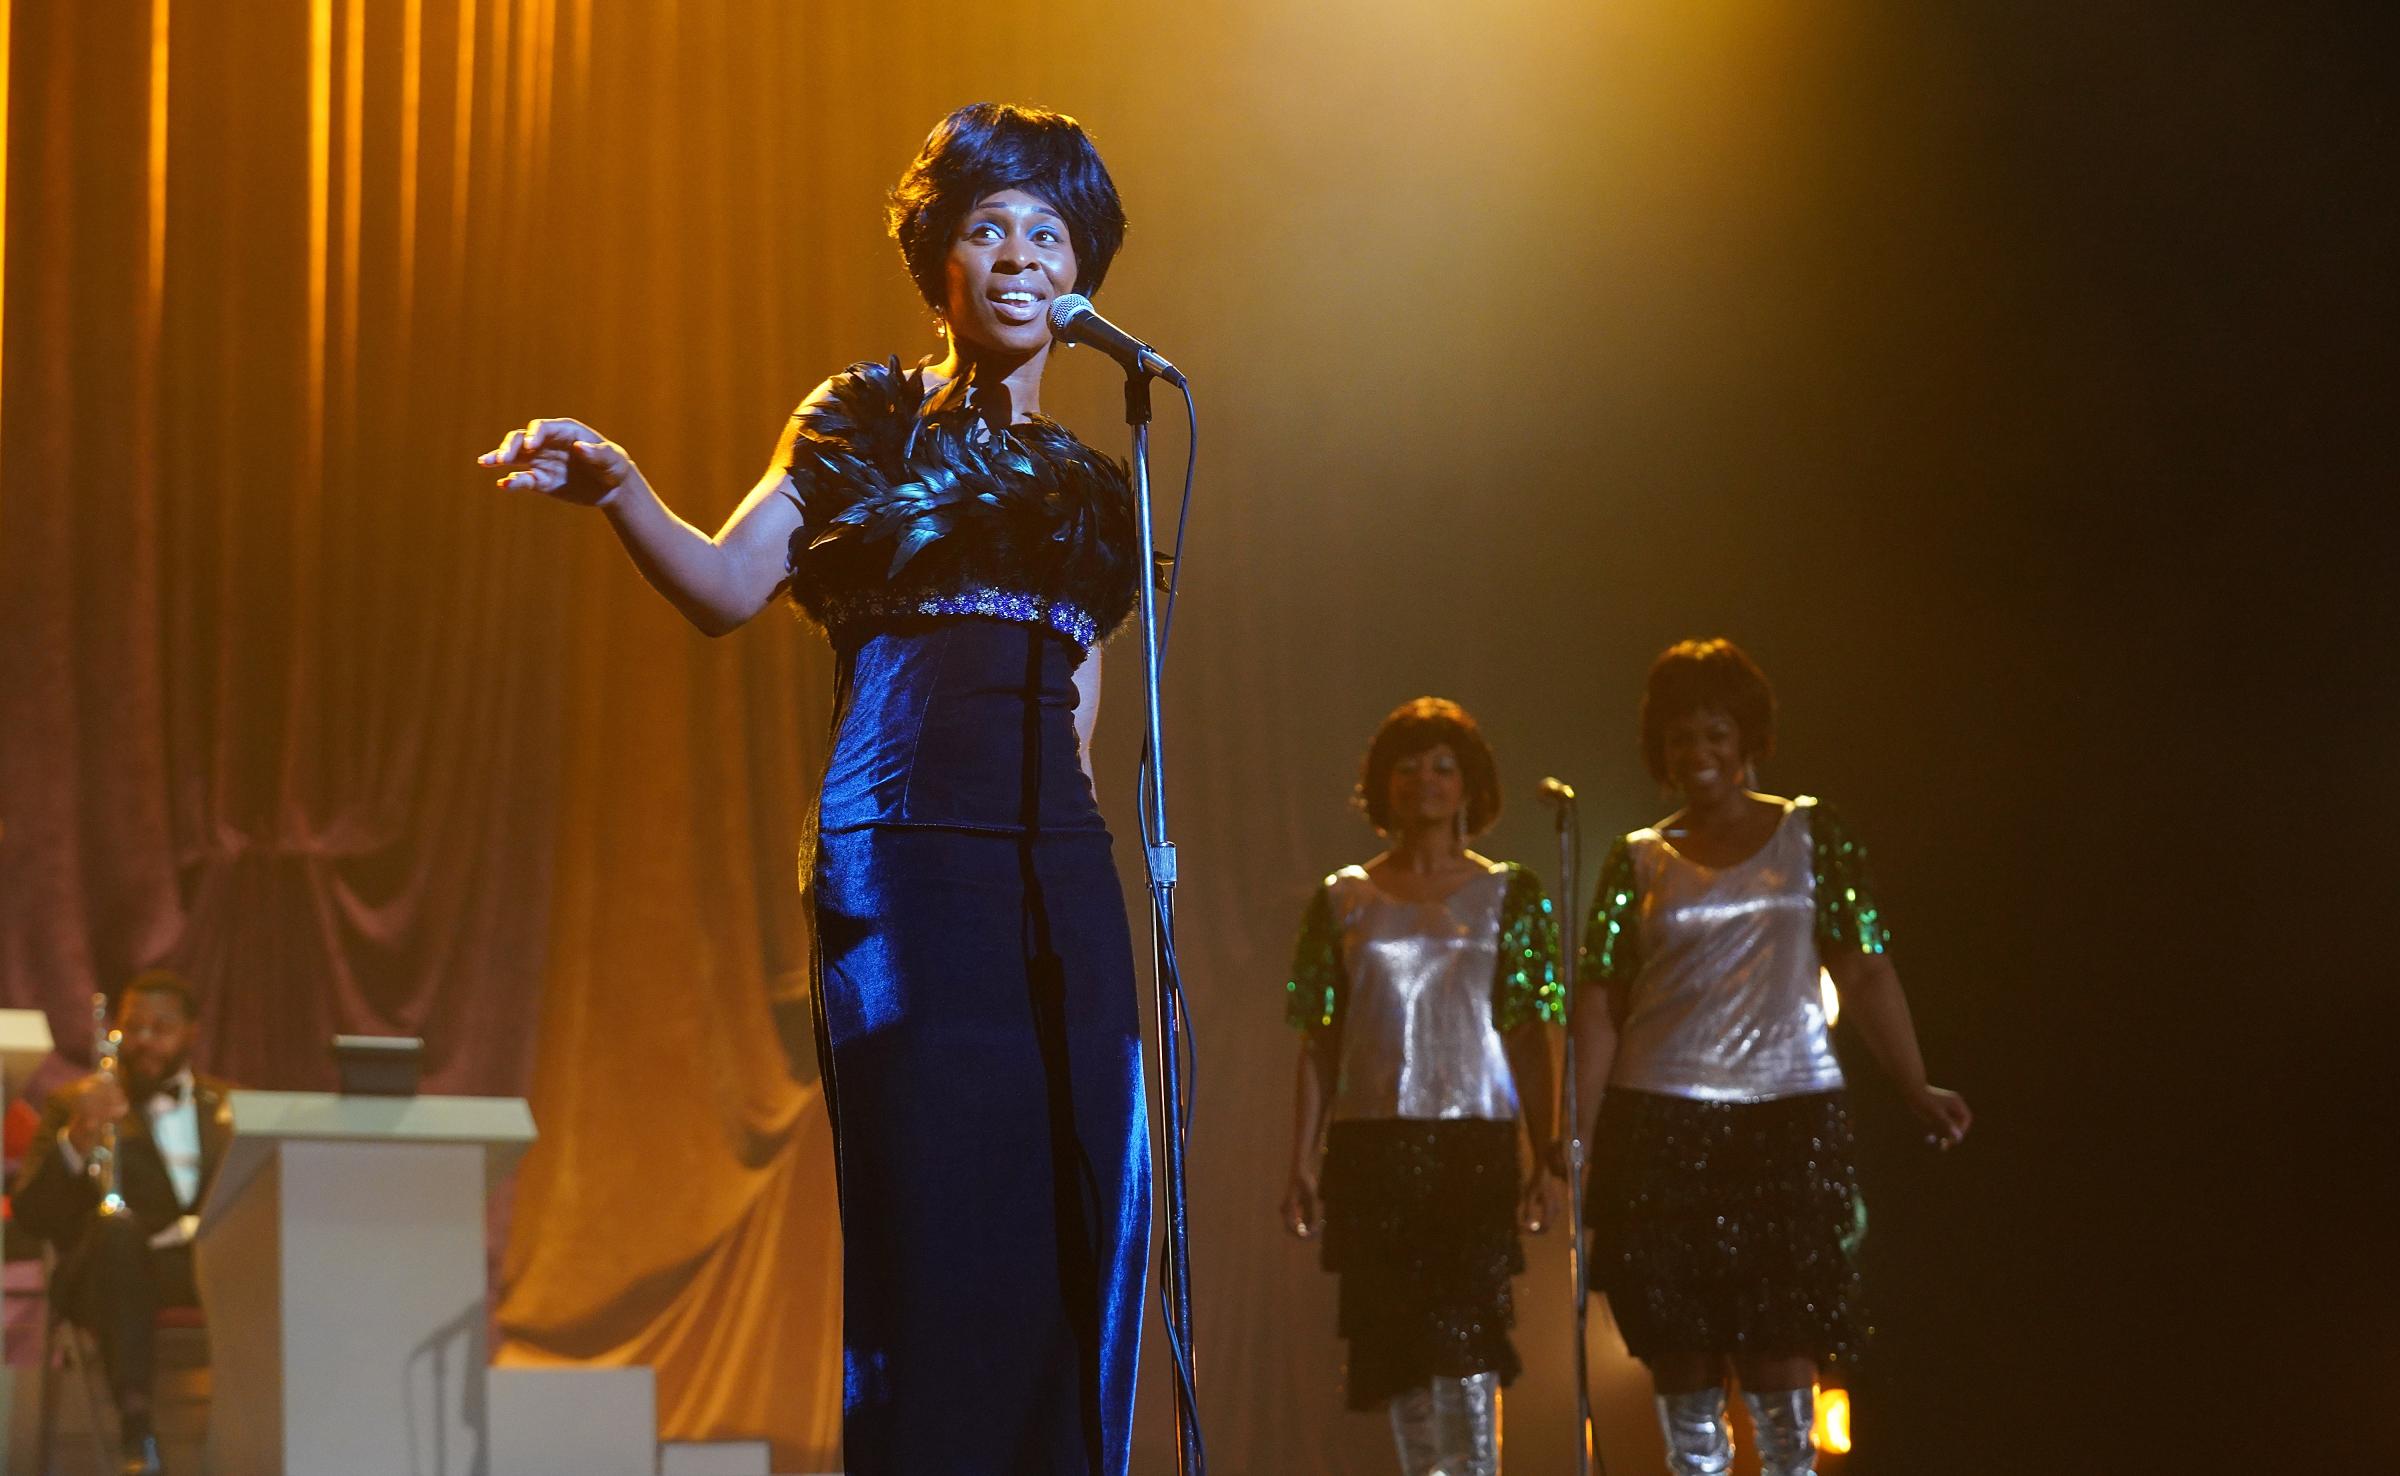 L to R: Cynthia Erivo as Aretha Franklin, Rebecca Naomi Jones as Carolyn Franklin and Patrice Covington as Erma Franklin in National Geographic's GENIUS: ARETHA. (Credit: National Geographic/Richard DuCree)